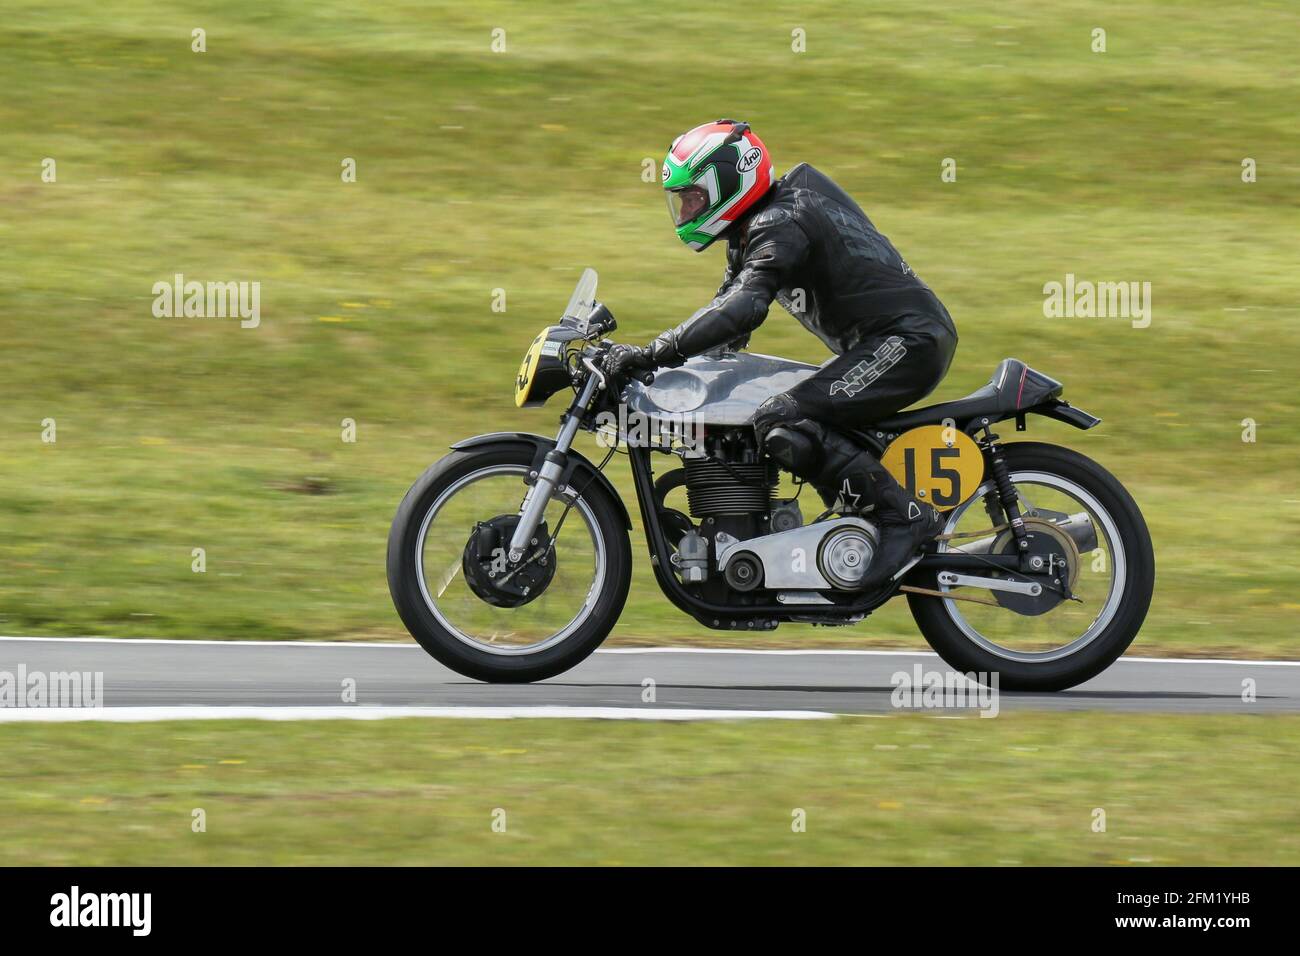 approaches The Gooseneck at the Cadwell Park International Classic in July 2015 Stock Photo